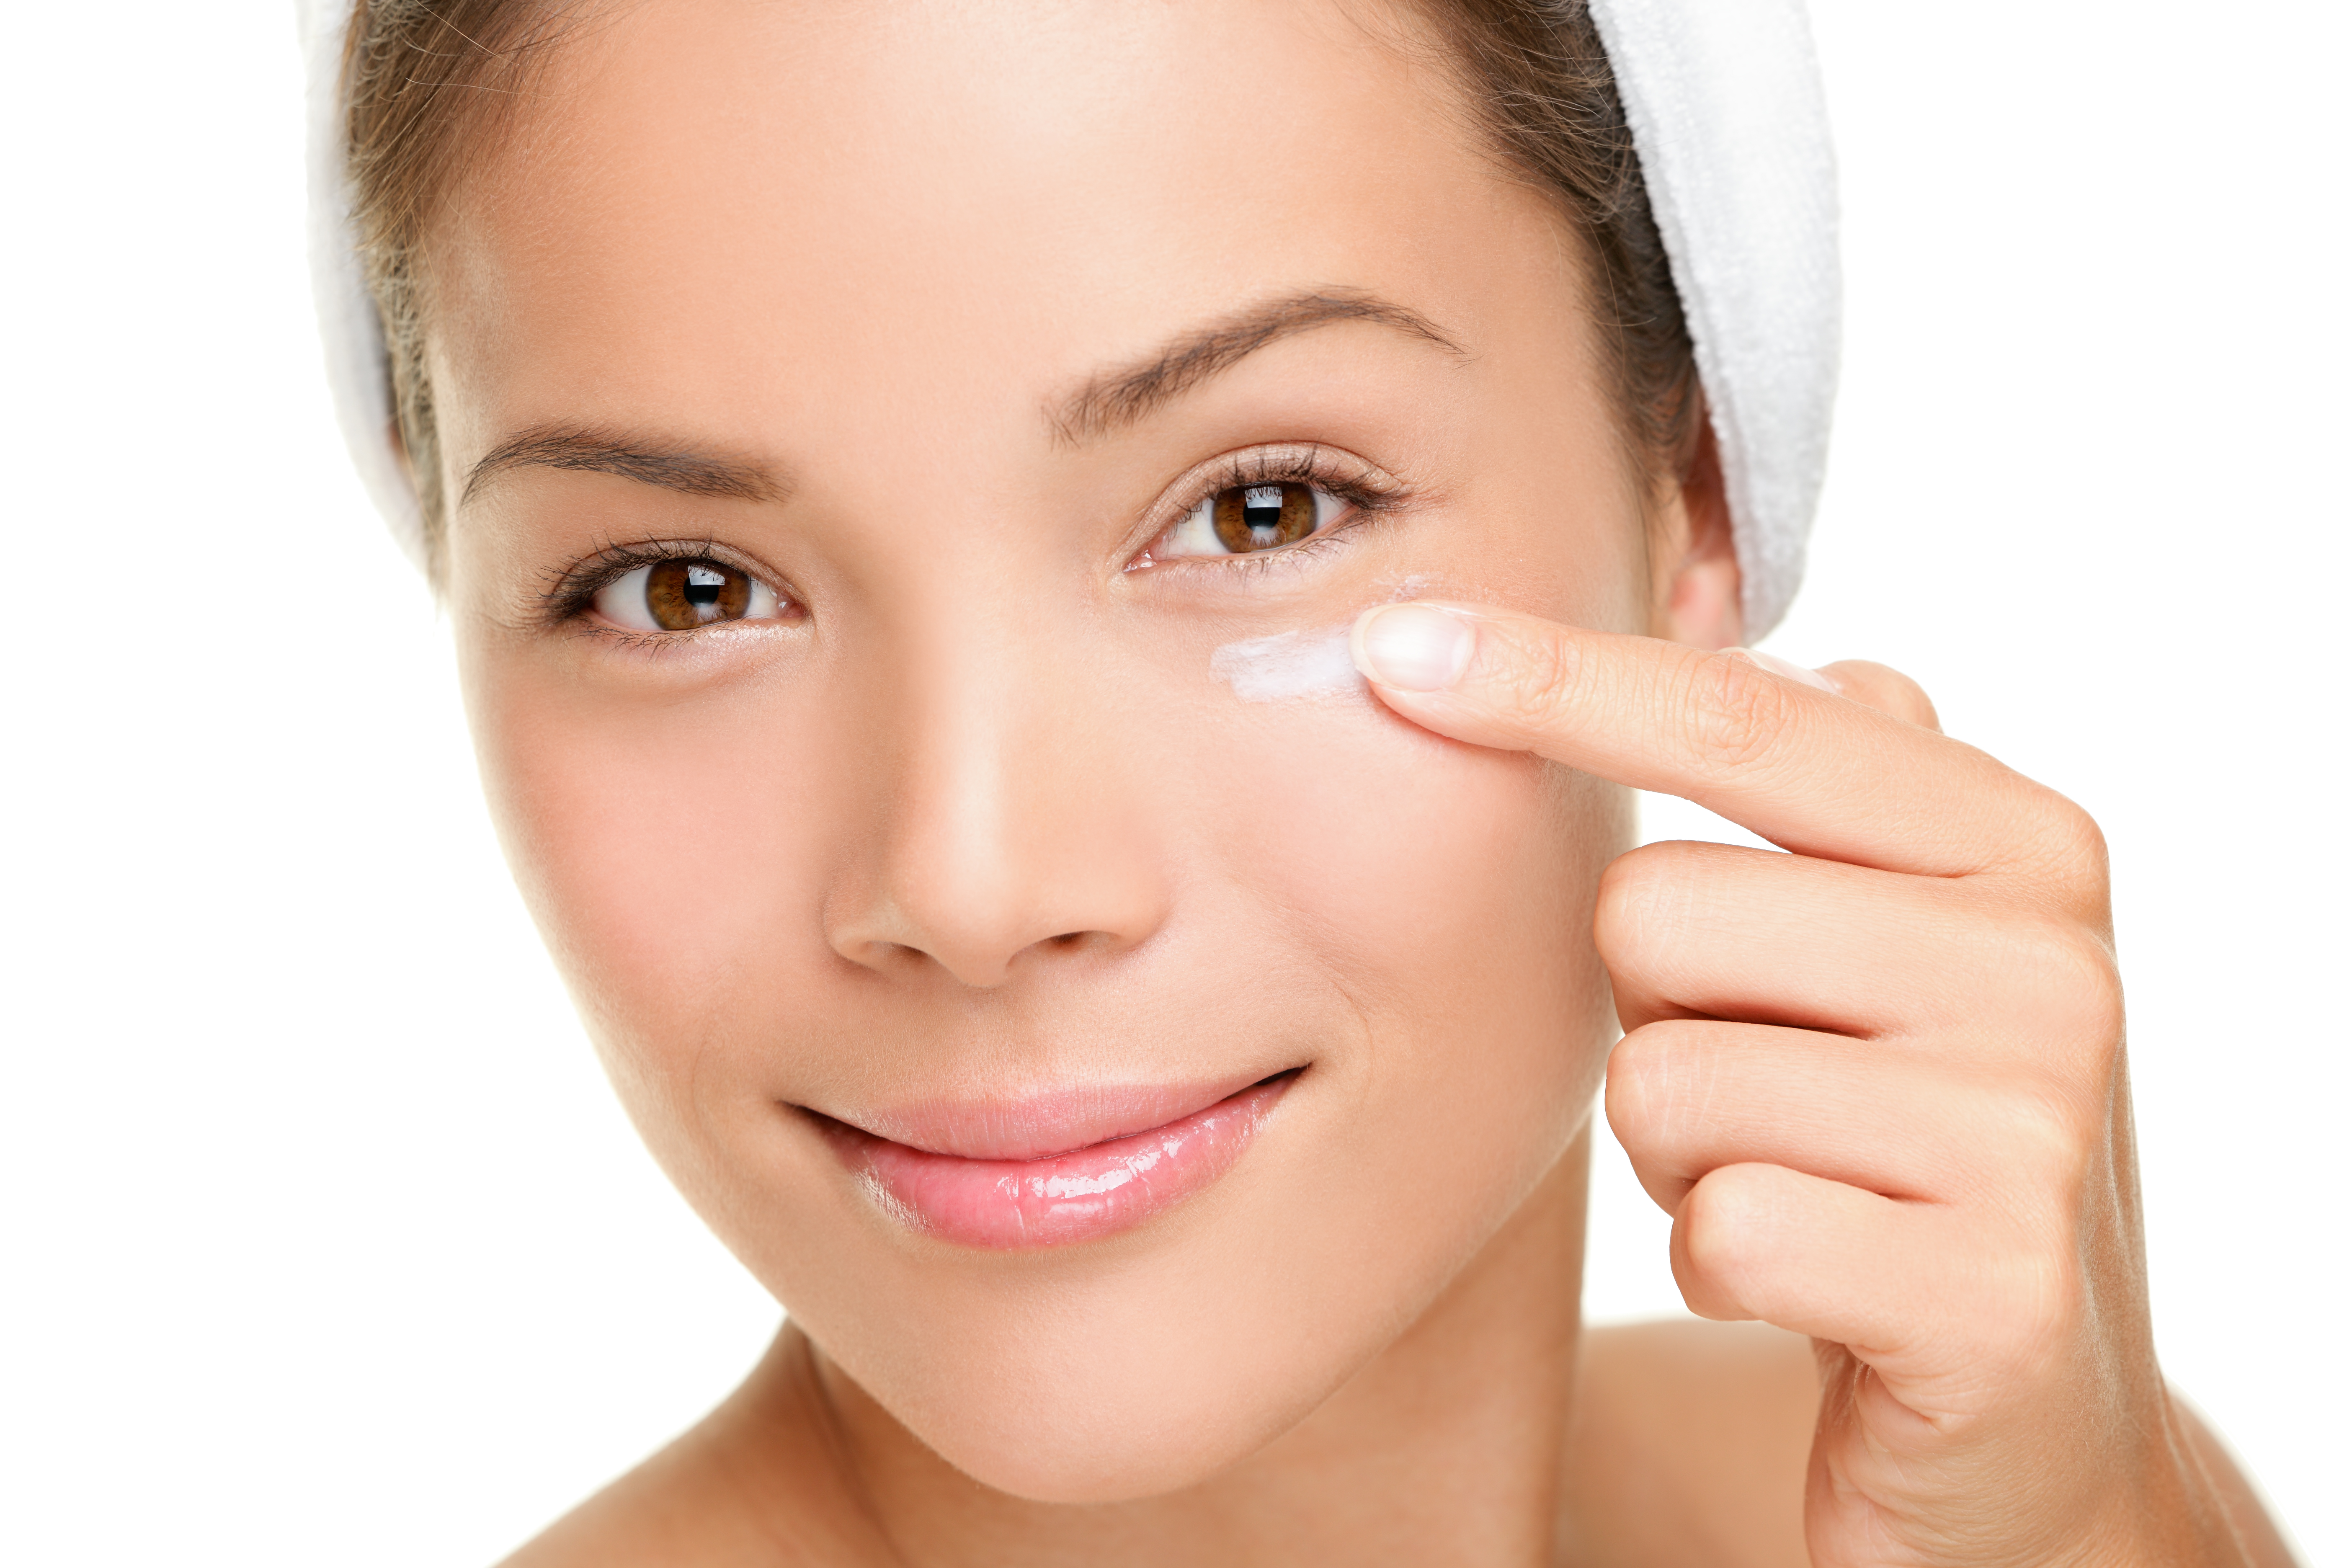 What Really Causes Puffy Eyes and Eye Bags